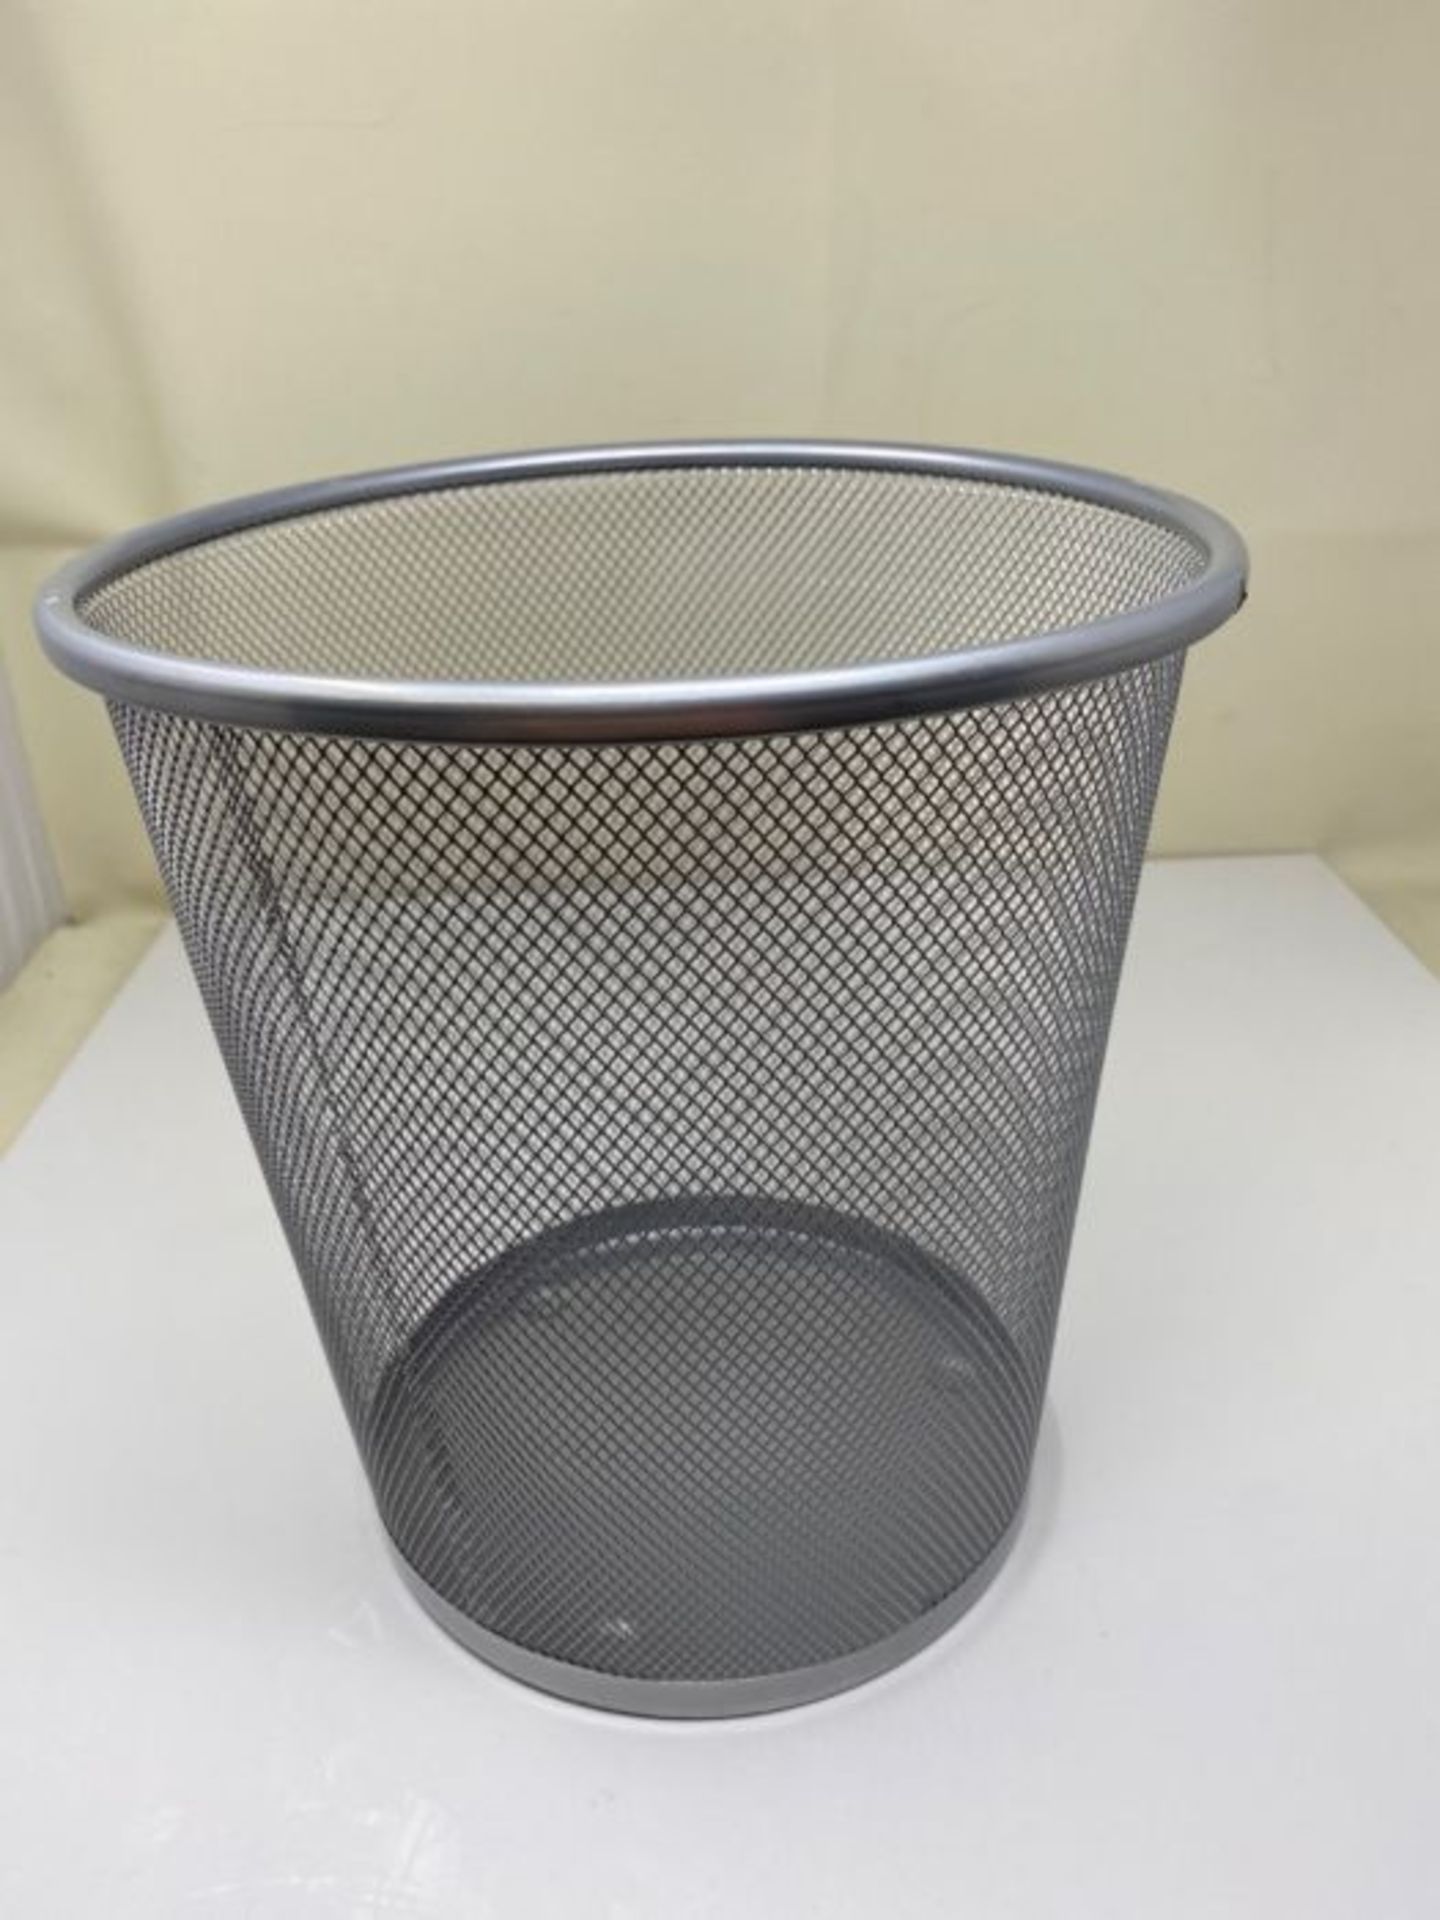 Zuvo Metal Wire Mesh Waste Basket Garbage Trash Can for Office Home Bedroom Height 10. - Image 2 of 2